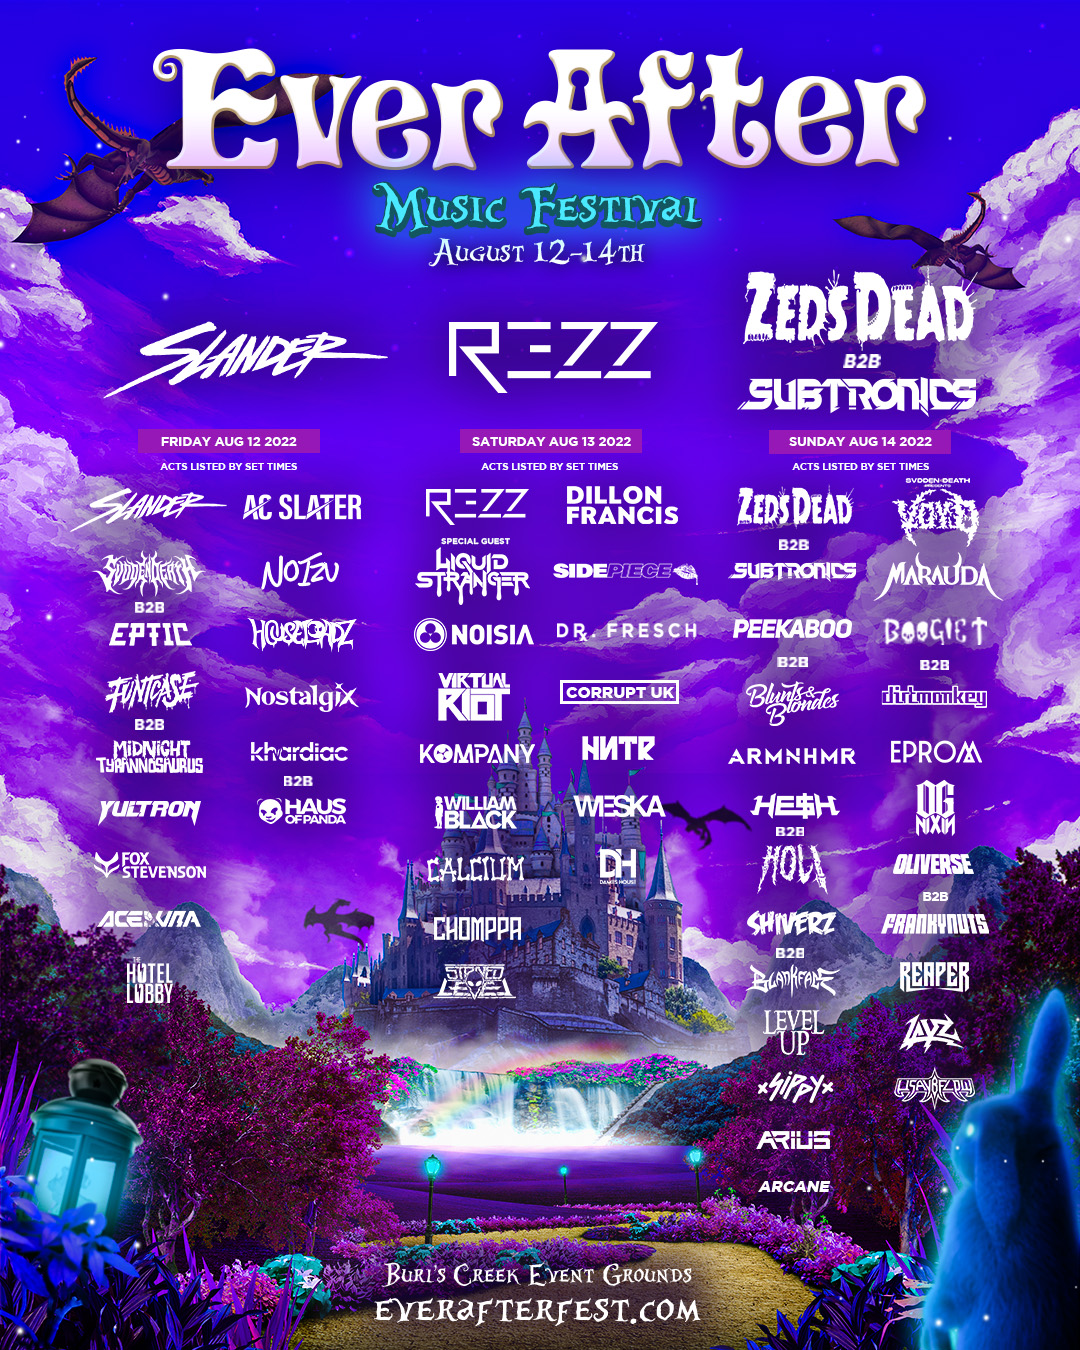 Ever After Festival is back in 2022 with a huge lineup!